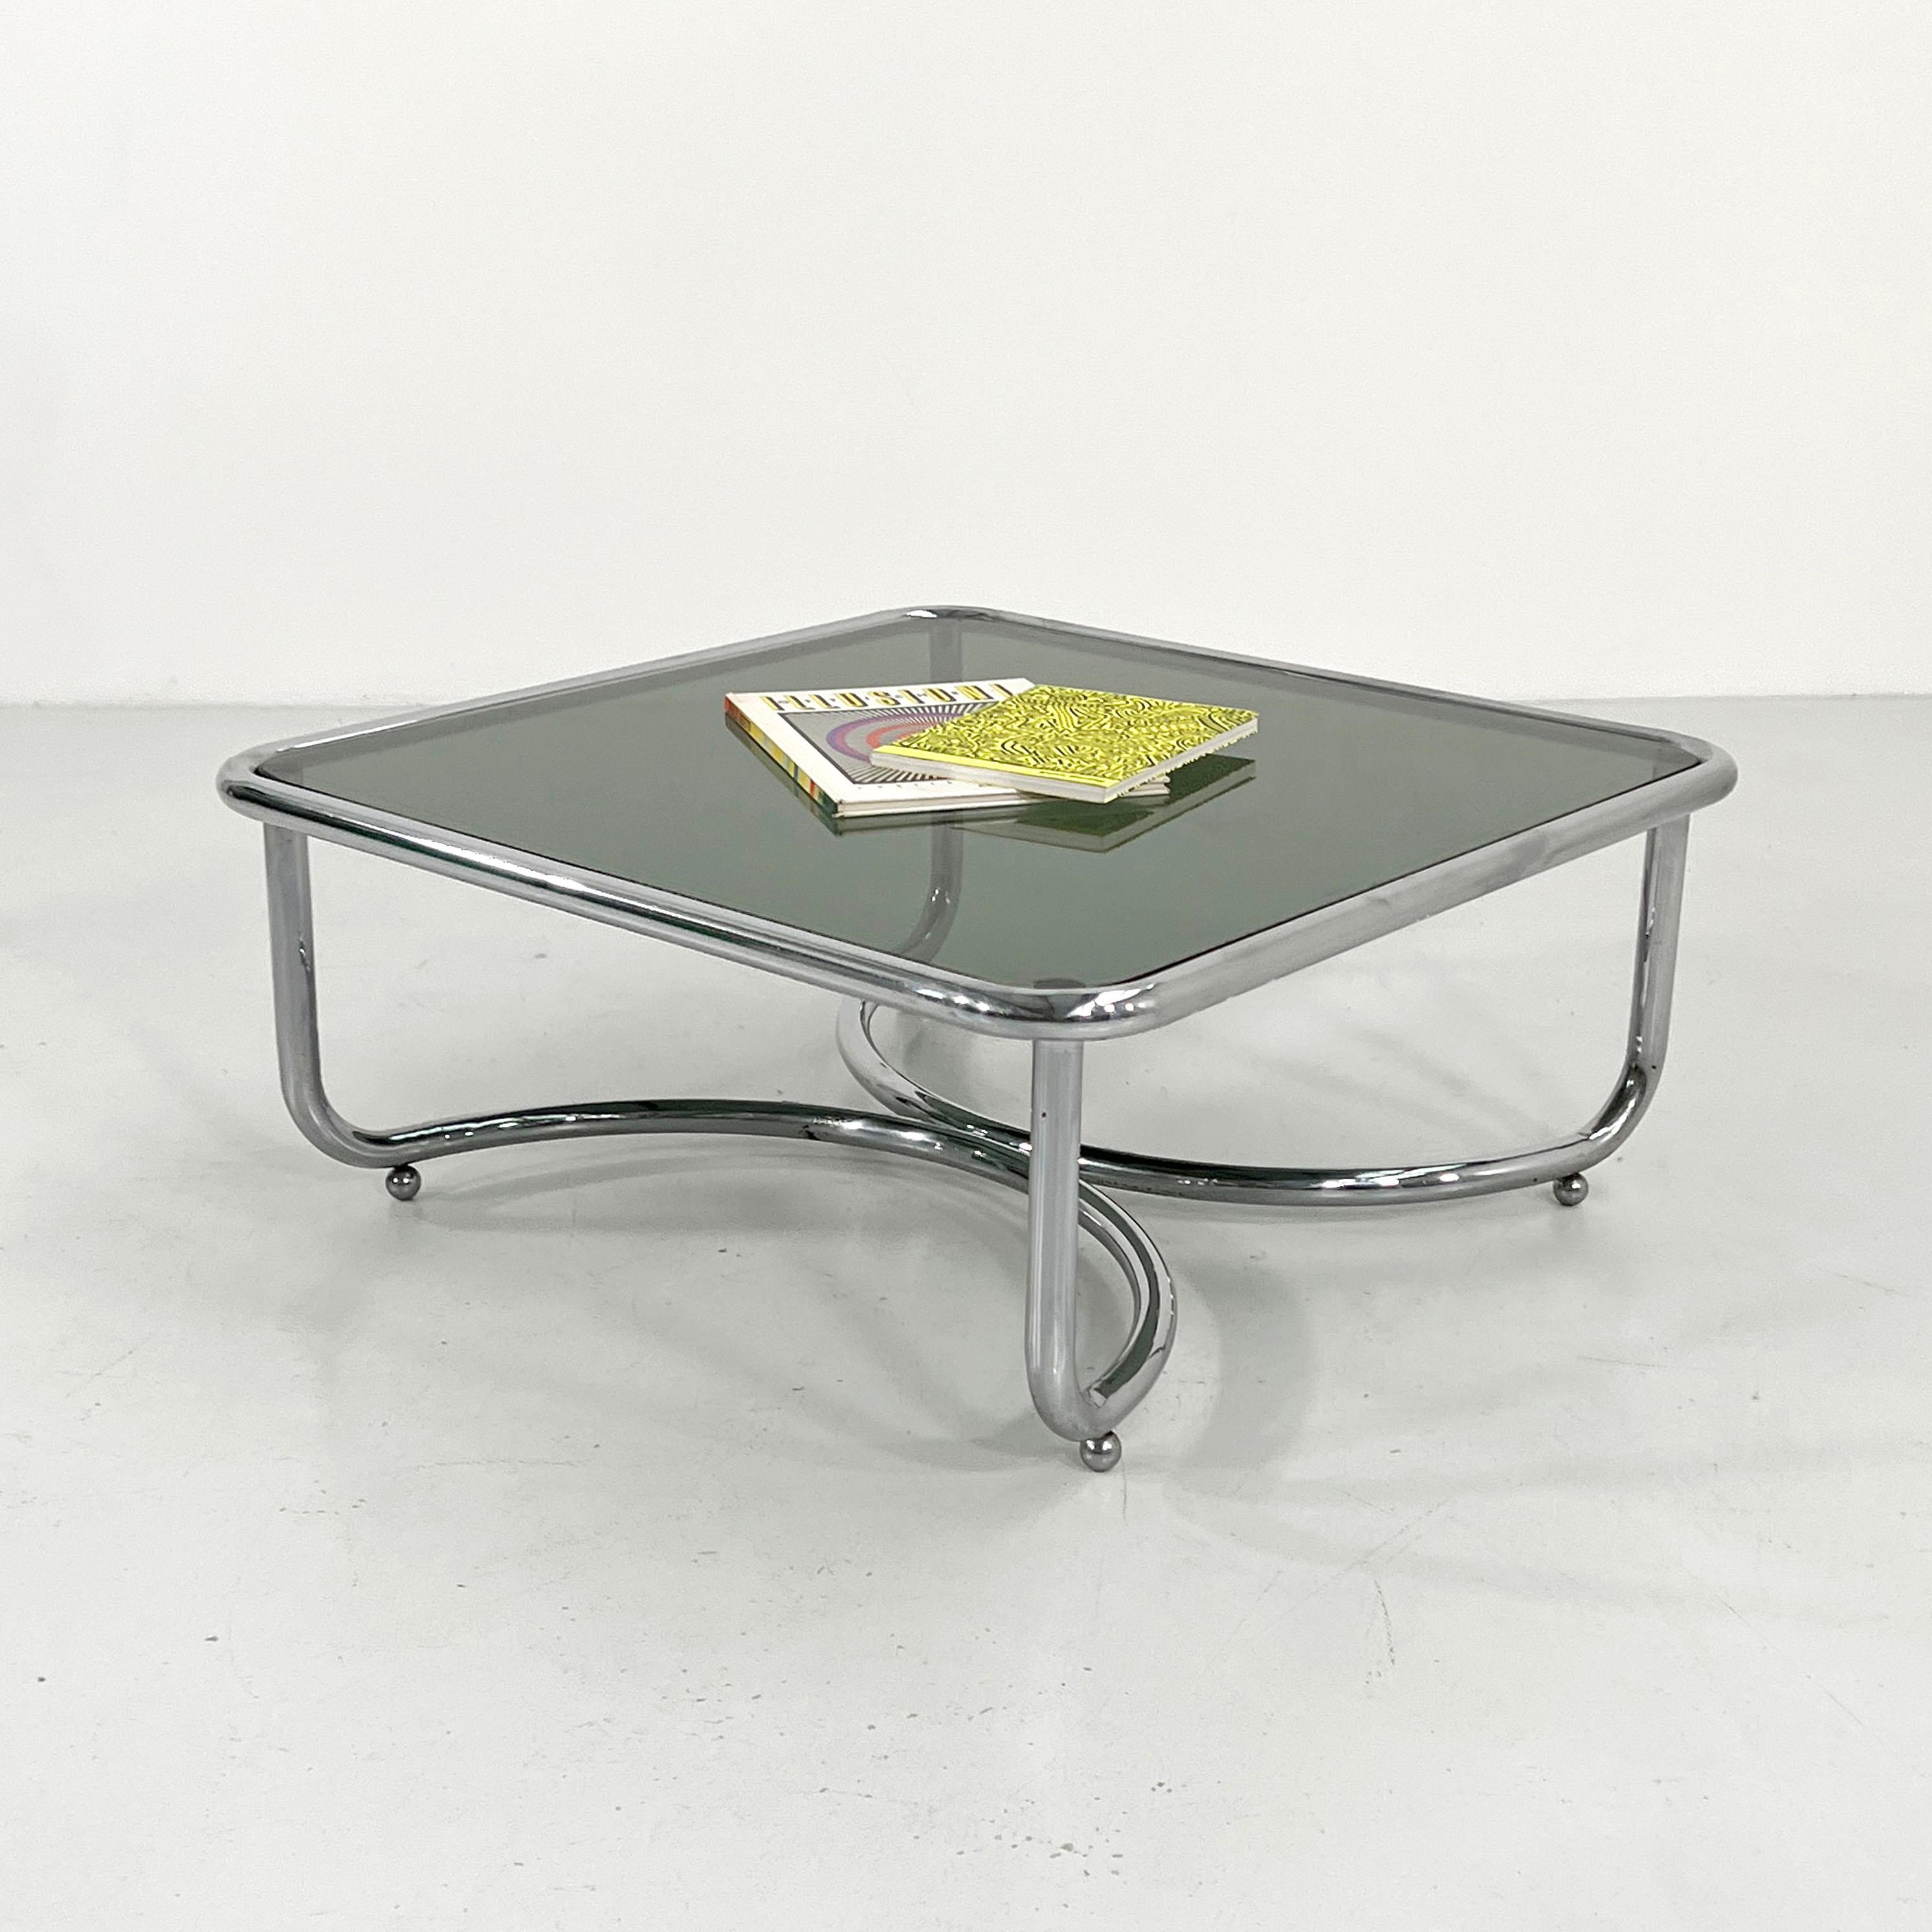 Late 20th Century Locus Solus Coffee Table by Gae Aulenti for Poltronova, 1970s